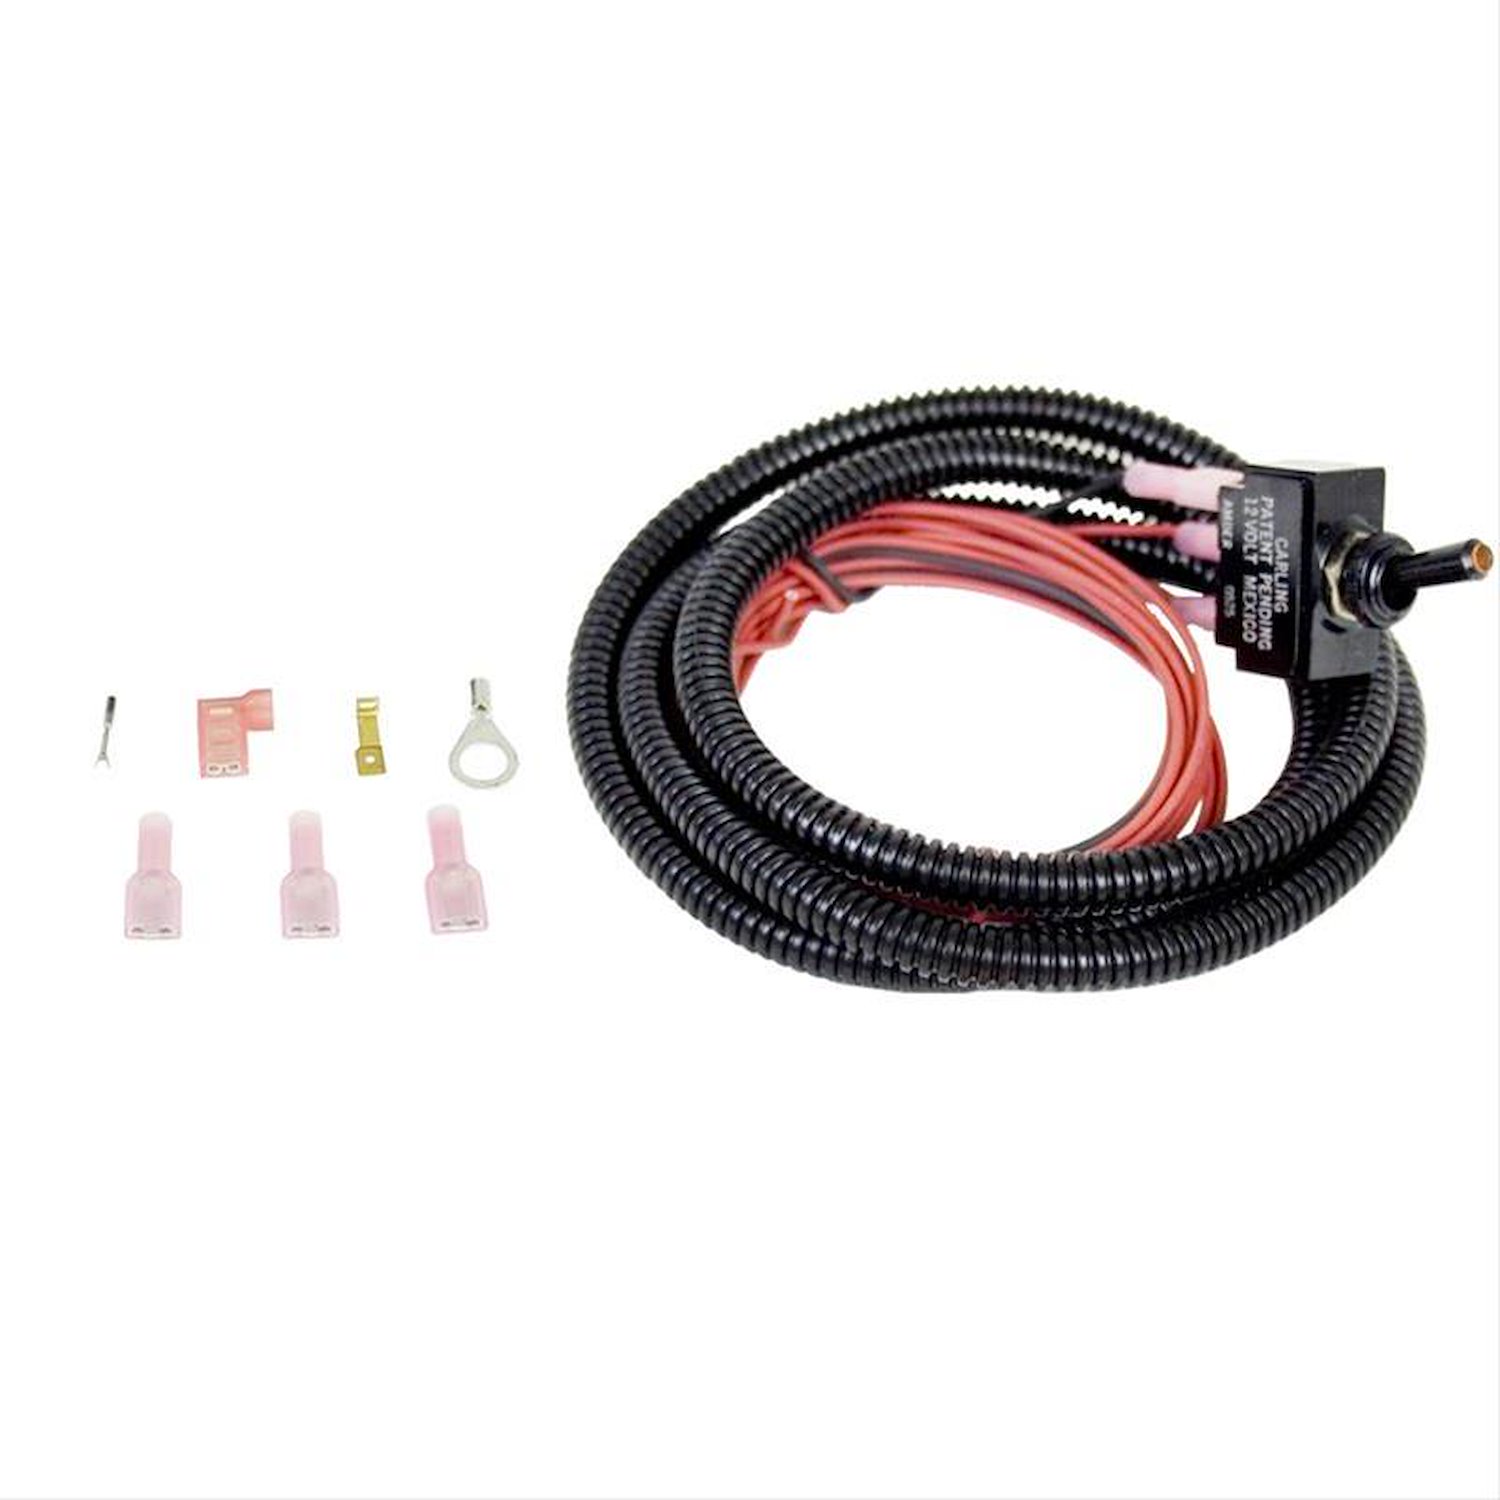 Governor Control Kit 2001-2004 Chevy Duramax Diesel